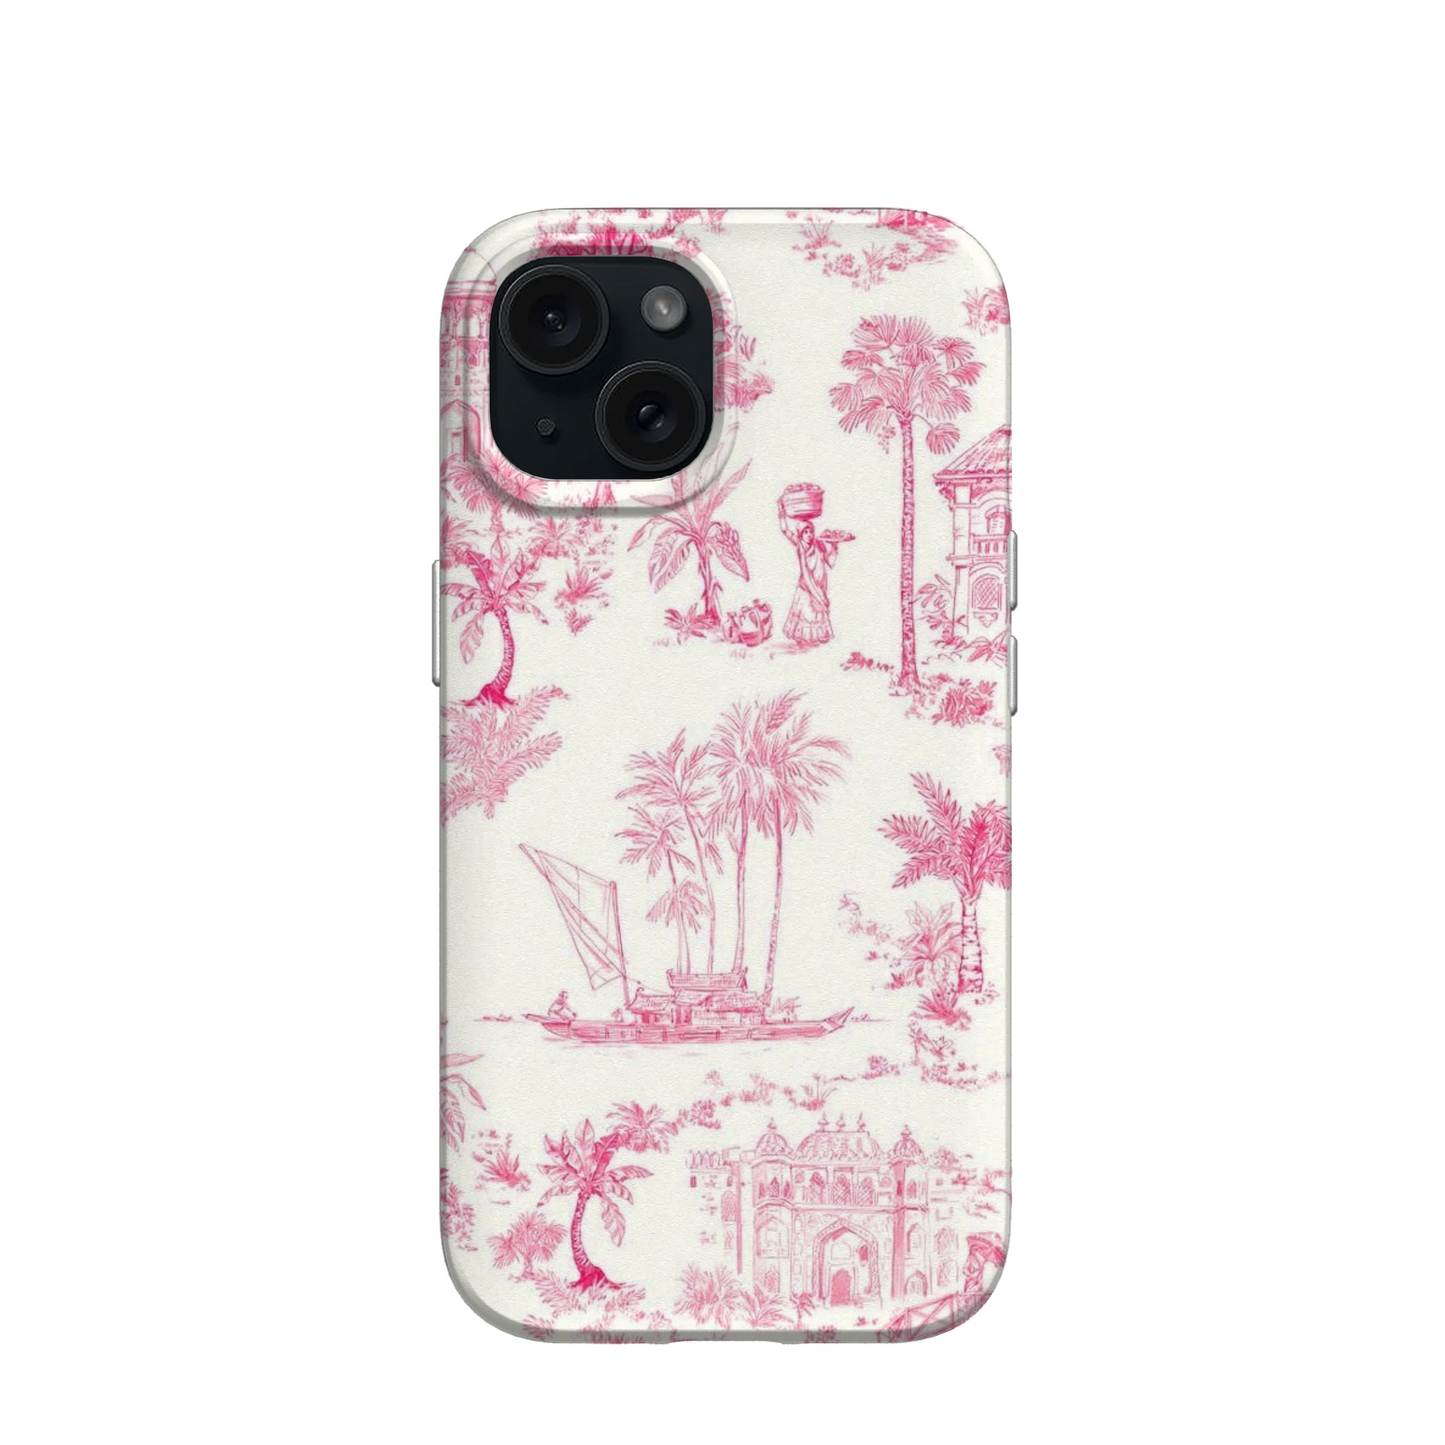 Preppy floral phone case in Pink print For All iPhone cases